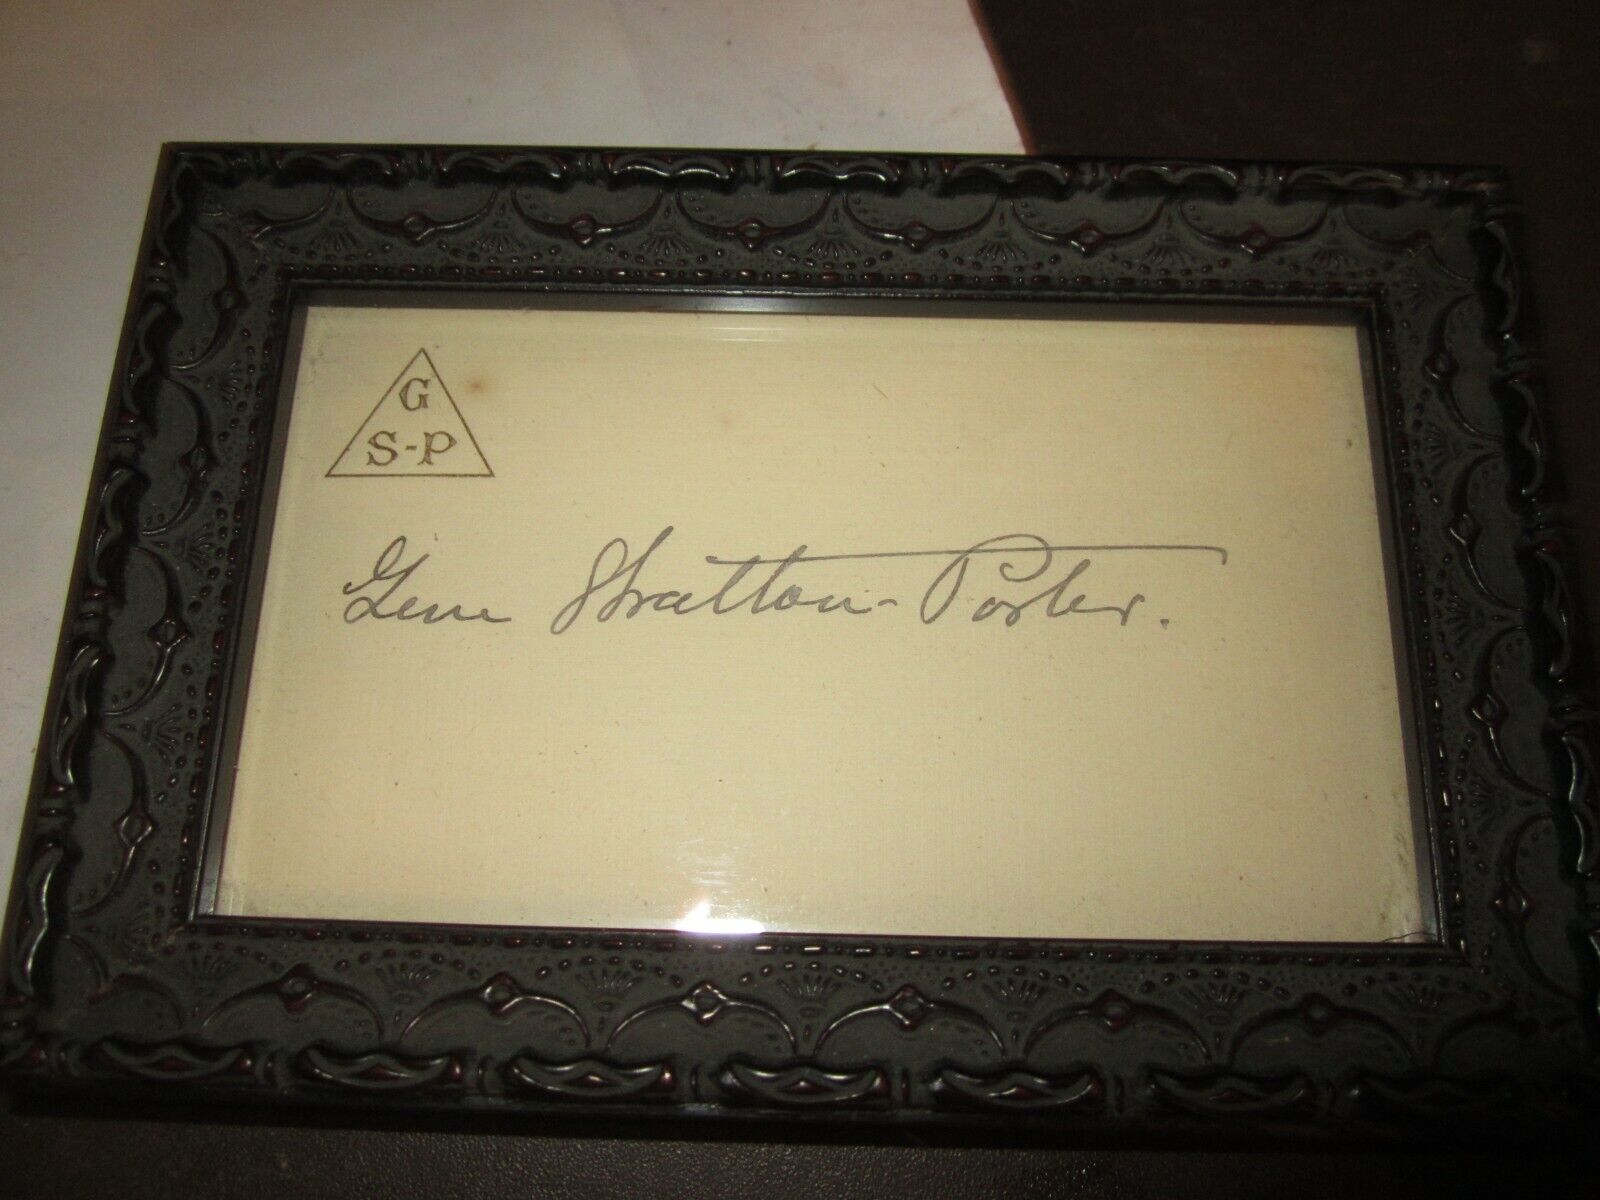 Gene Stratton Porter Autograph on a personalized card.